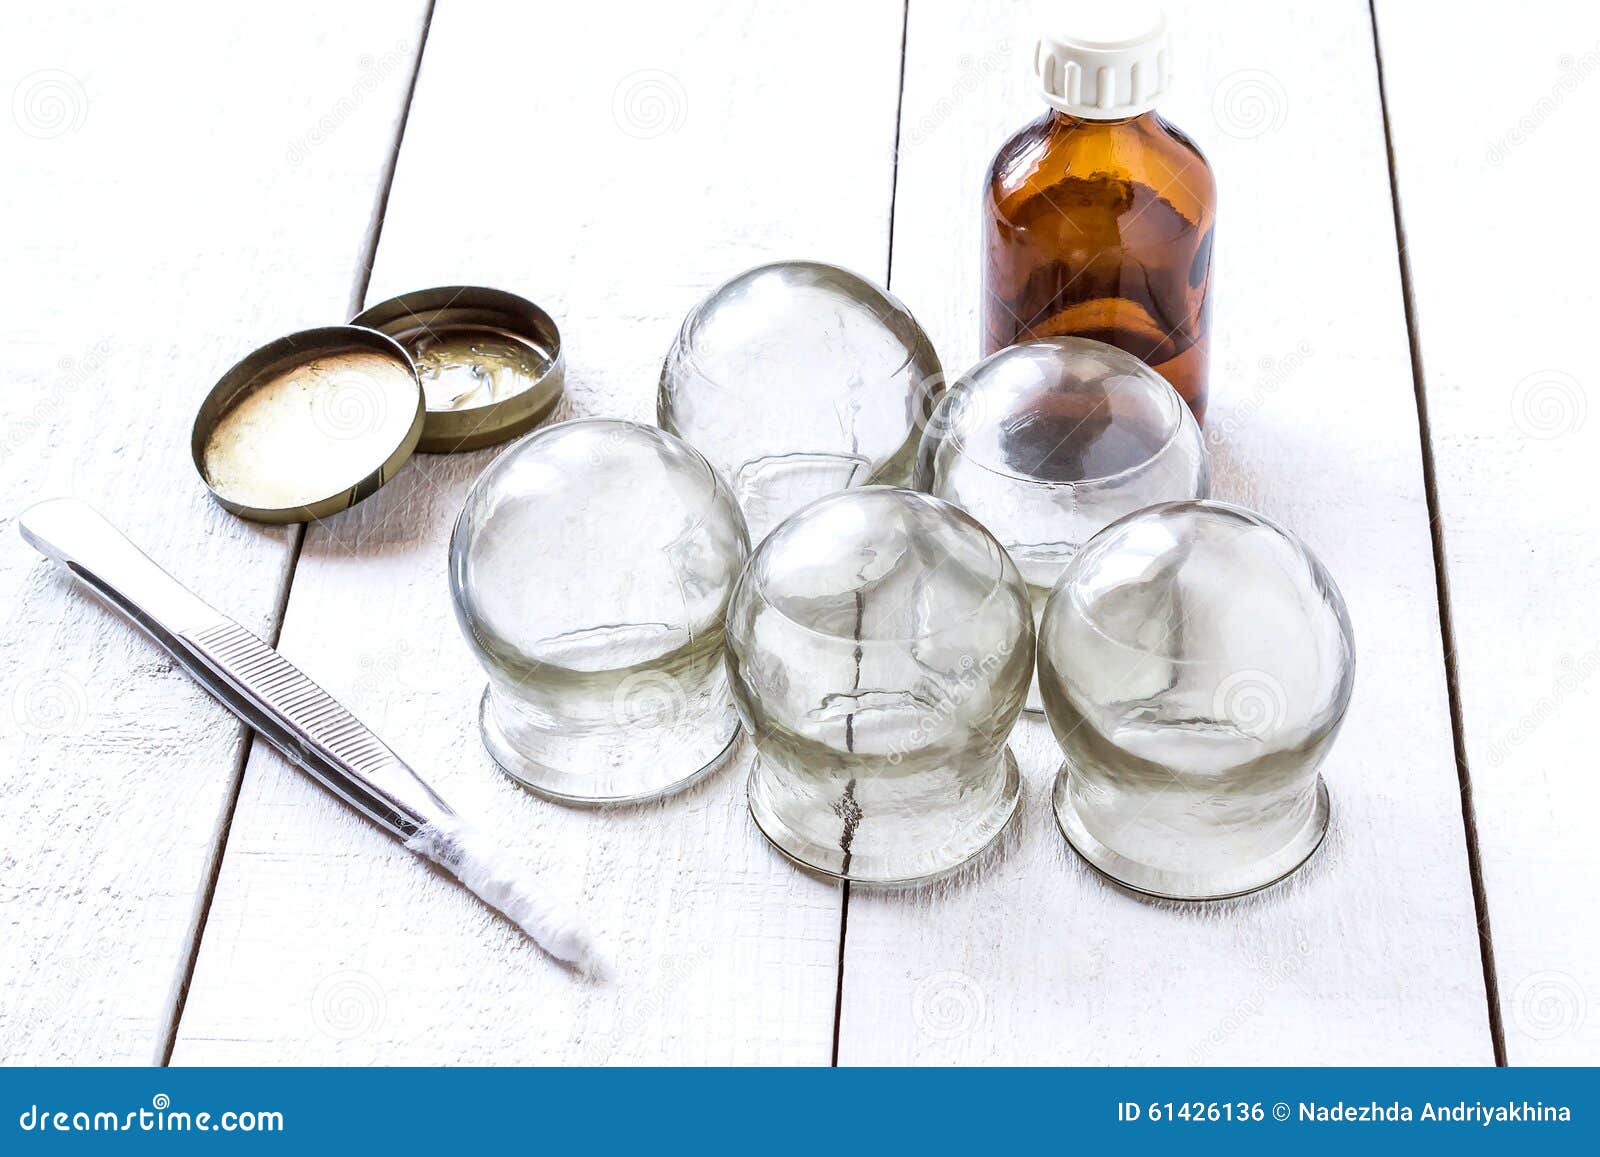 old medical cupping glass, the alcohol, petrolatum and tweezers